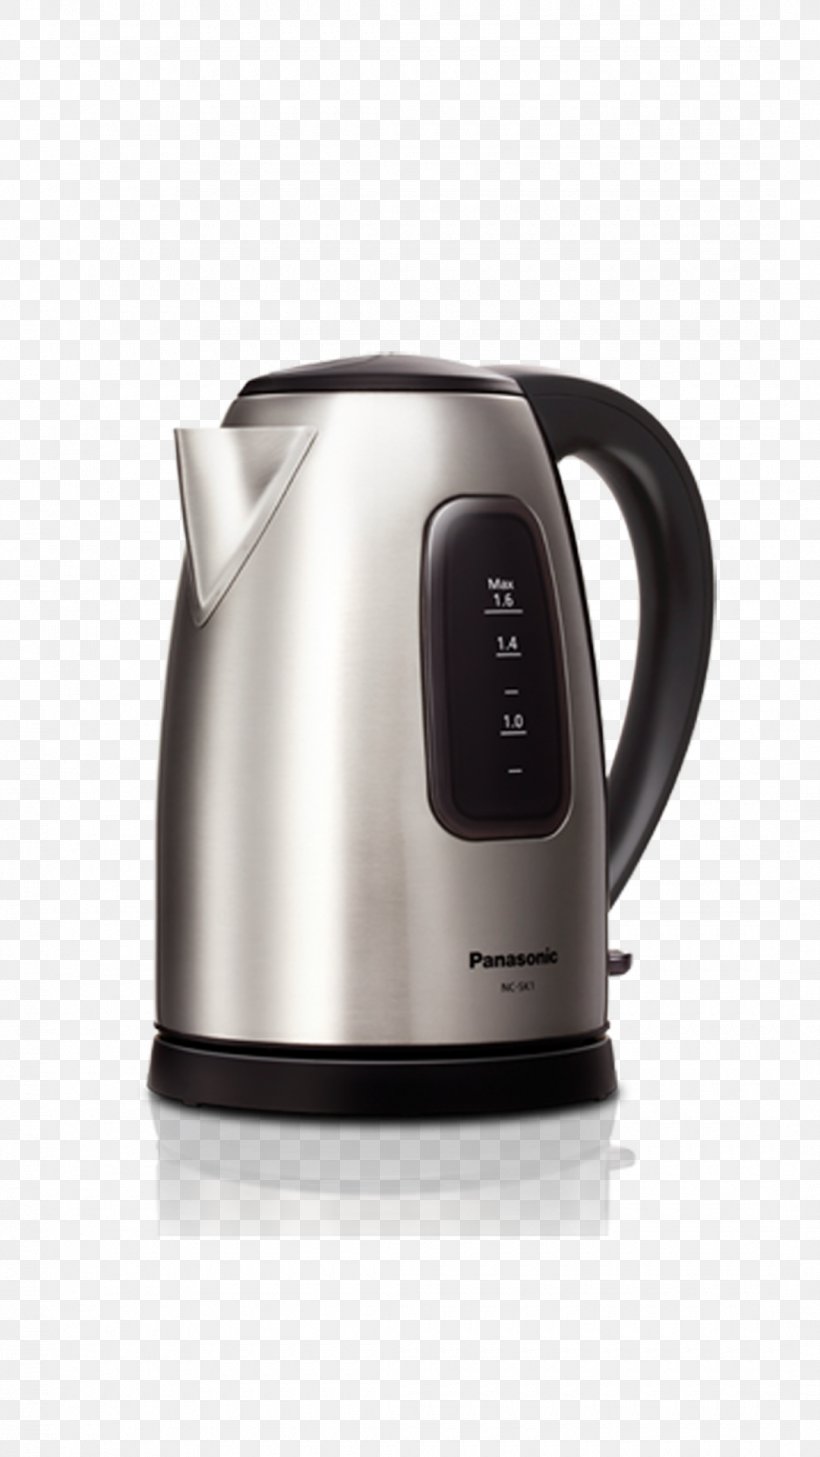 Electric Kettle Panasonic Electric Water Boiler Electricity, PNG, 1080x1920px, Kettle, Electric Kettle, Electric Water Boiler, Electricity, Home Appliance Download Free